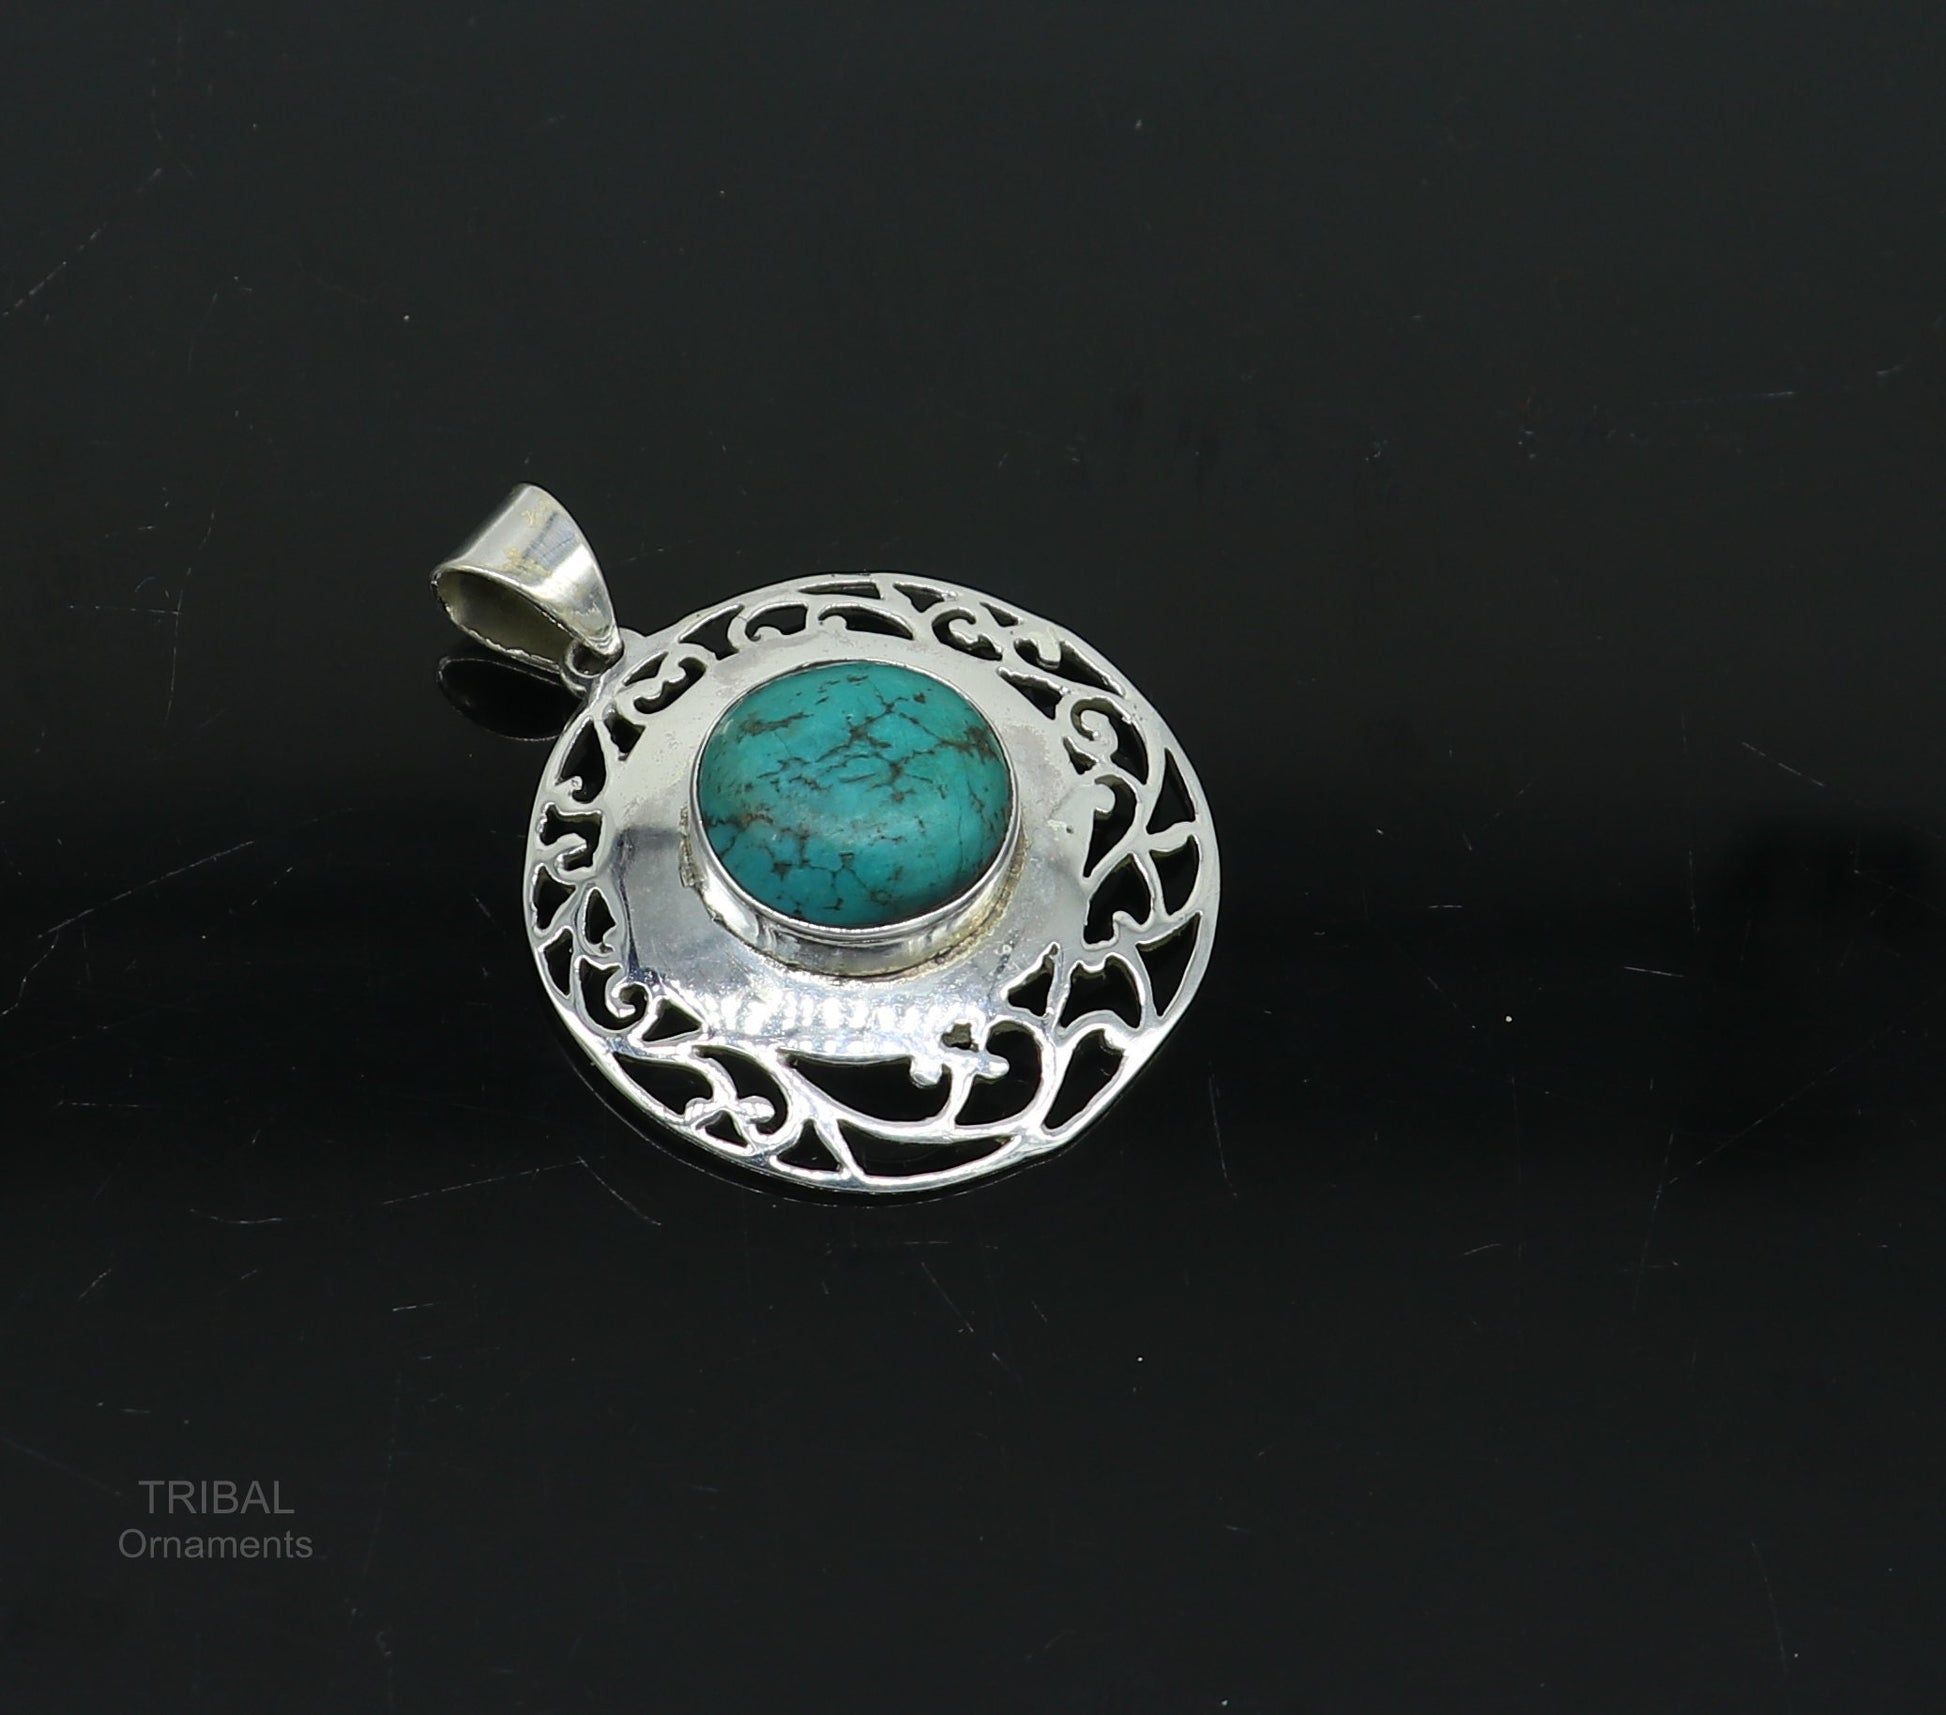 925 sterling silver handmade fabulous antique stylish turquoise stone pendant pretty attractive tribal jewelry from india nsp443 - TRIBAL ORNAMENTS